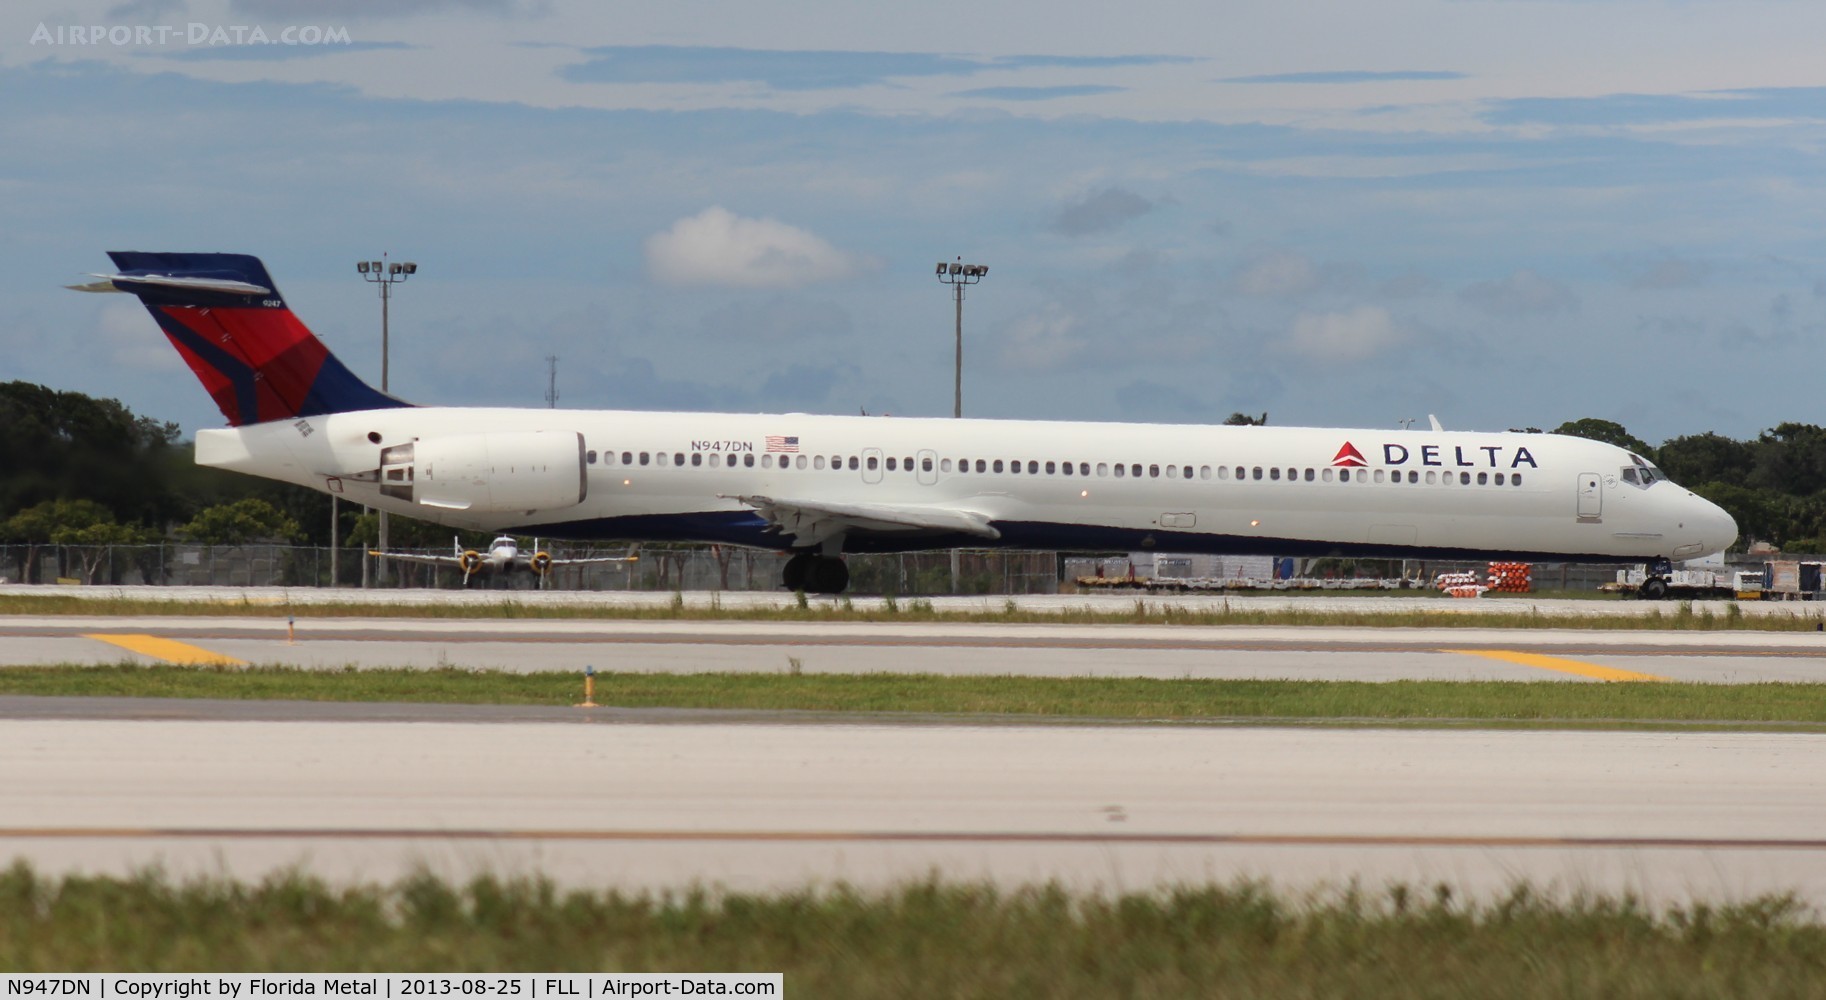 N947DN, 1996 McDonnell Douglas MD-90-30 C/N 53355, Ex Japan Air System MD-90, now with Delta